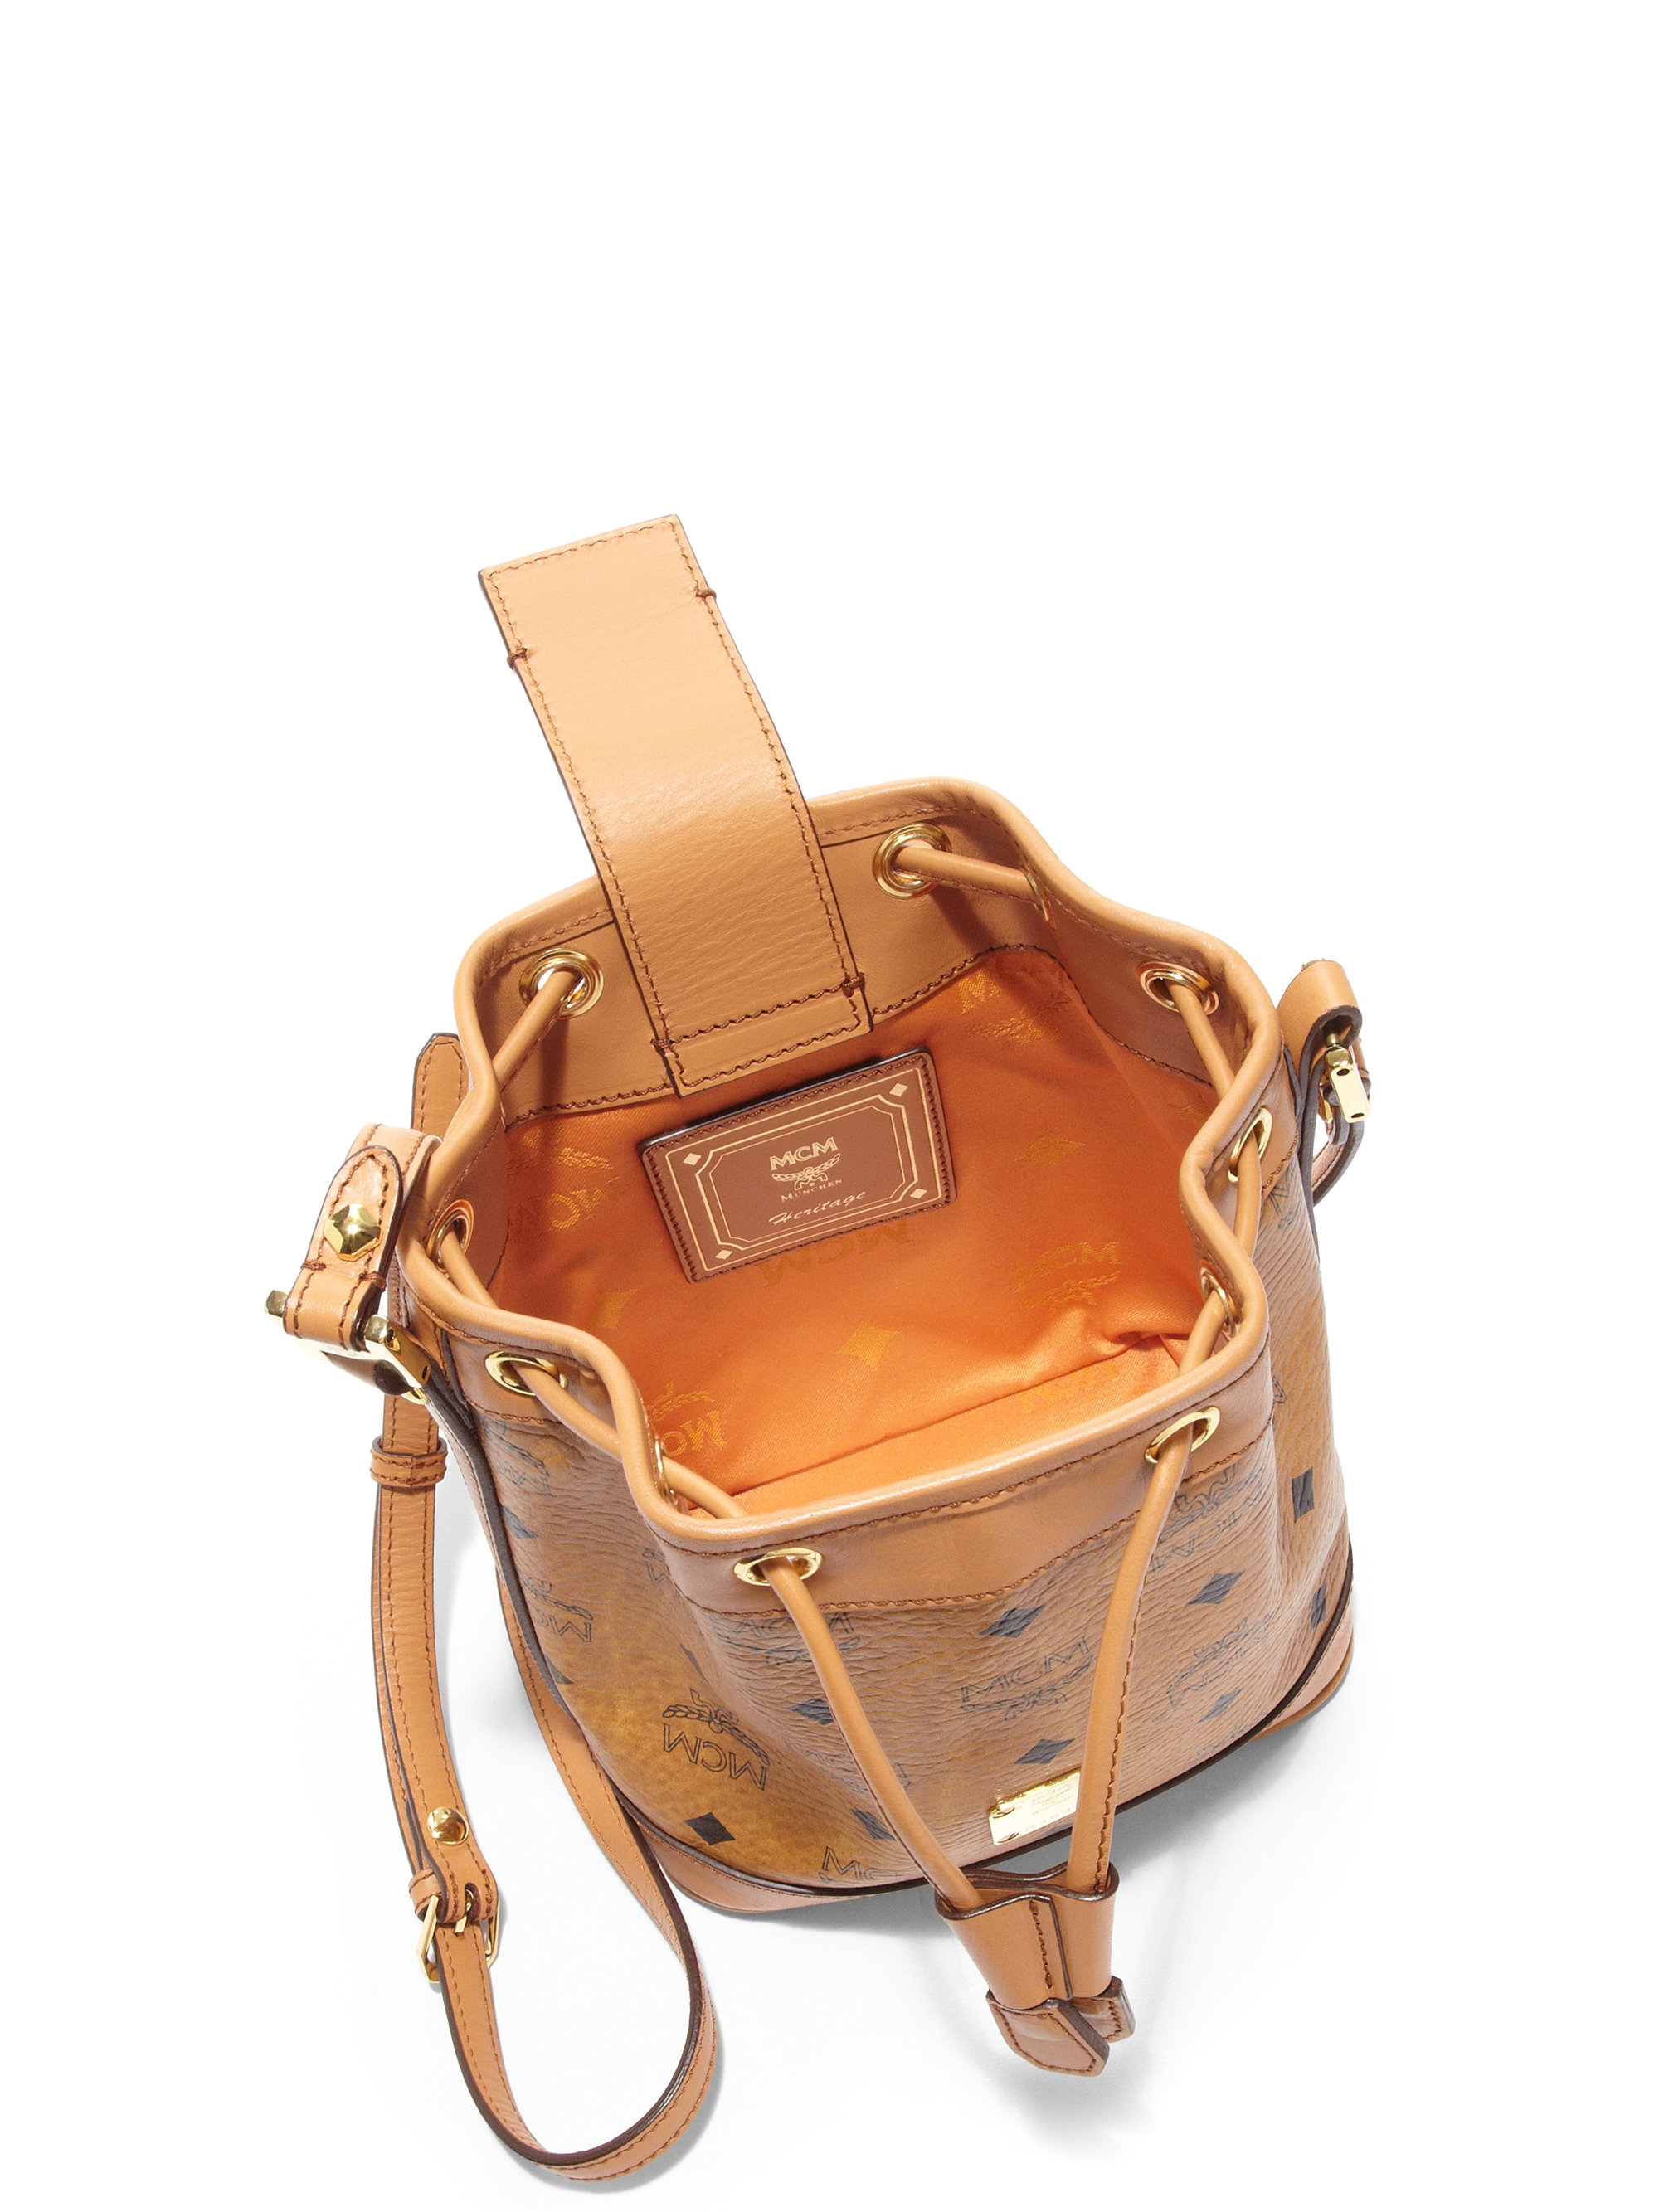 Lyst - Mcm Heritage Mini Coated Canvas Drawstring Bucket Bag in Brown